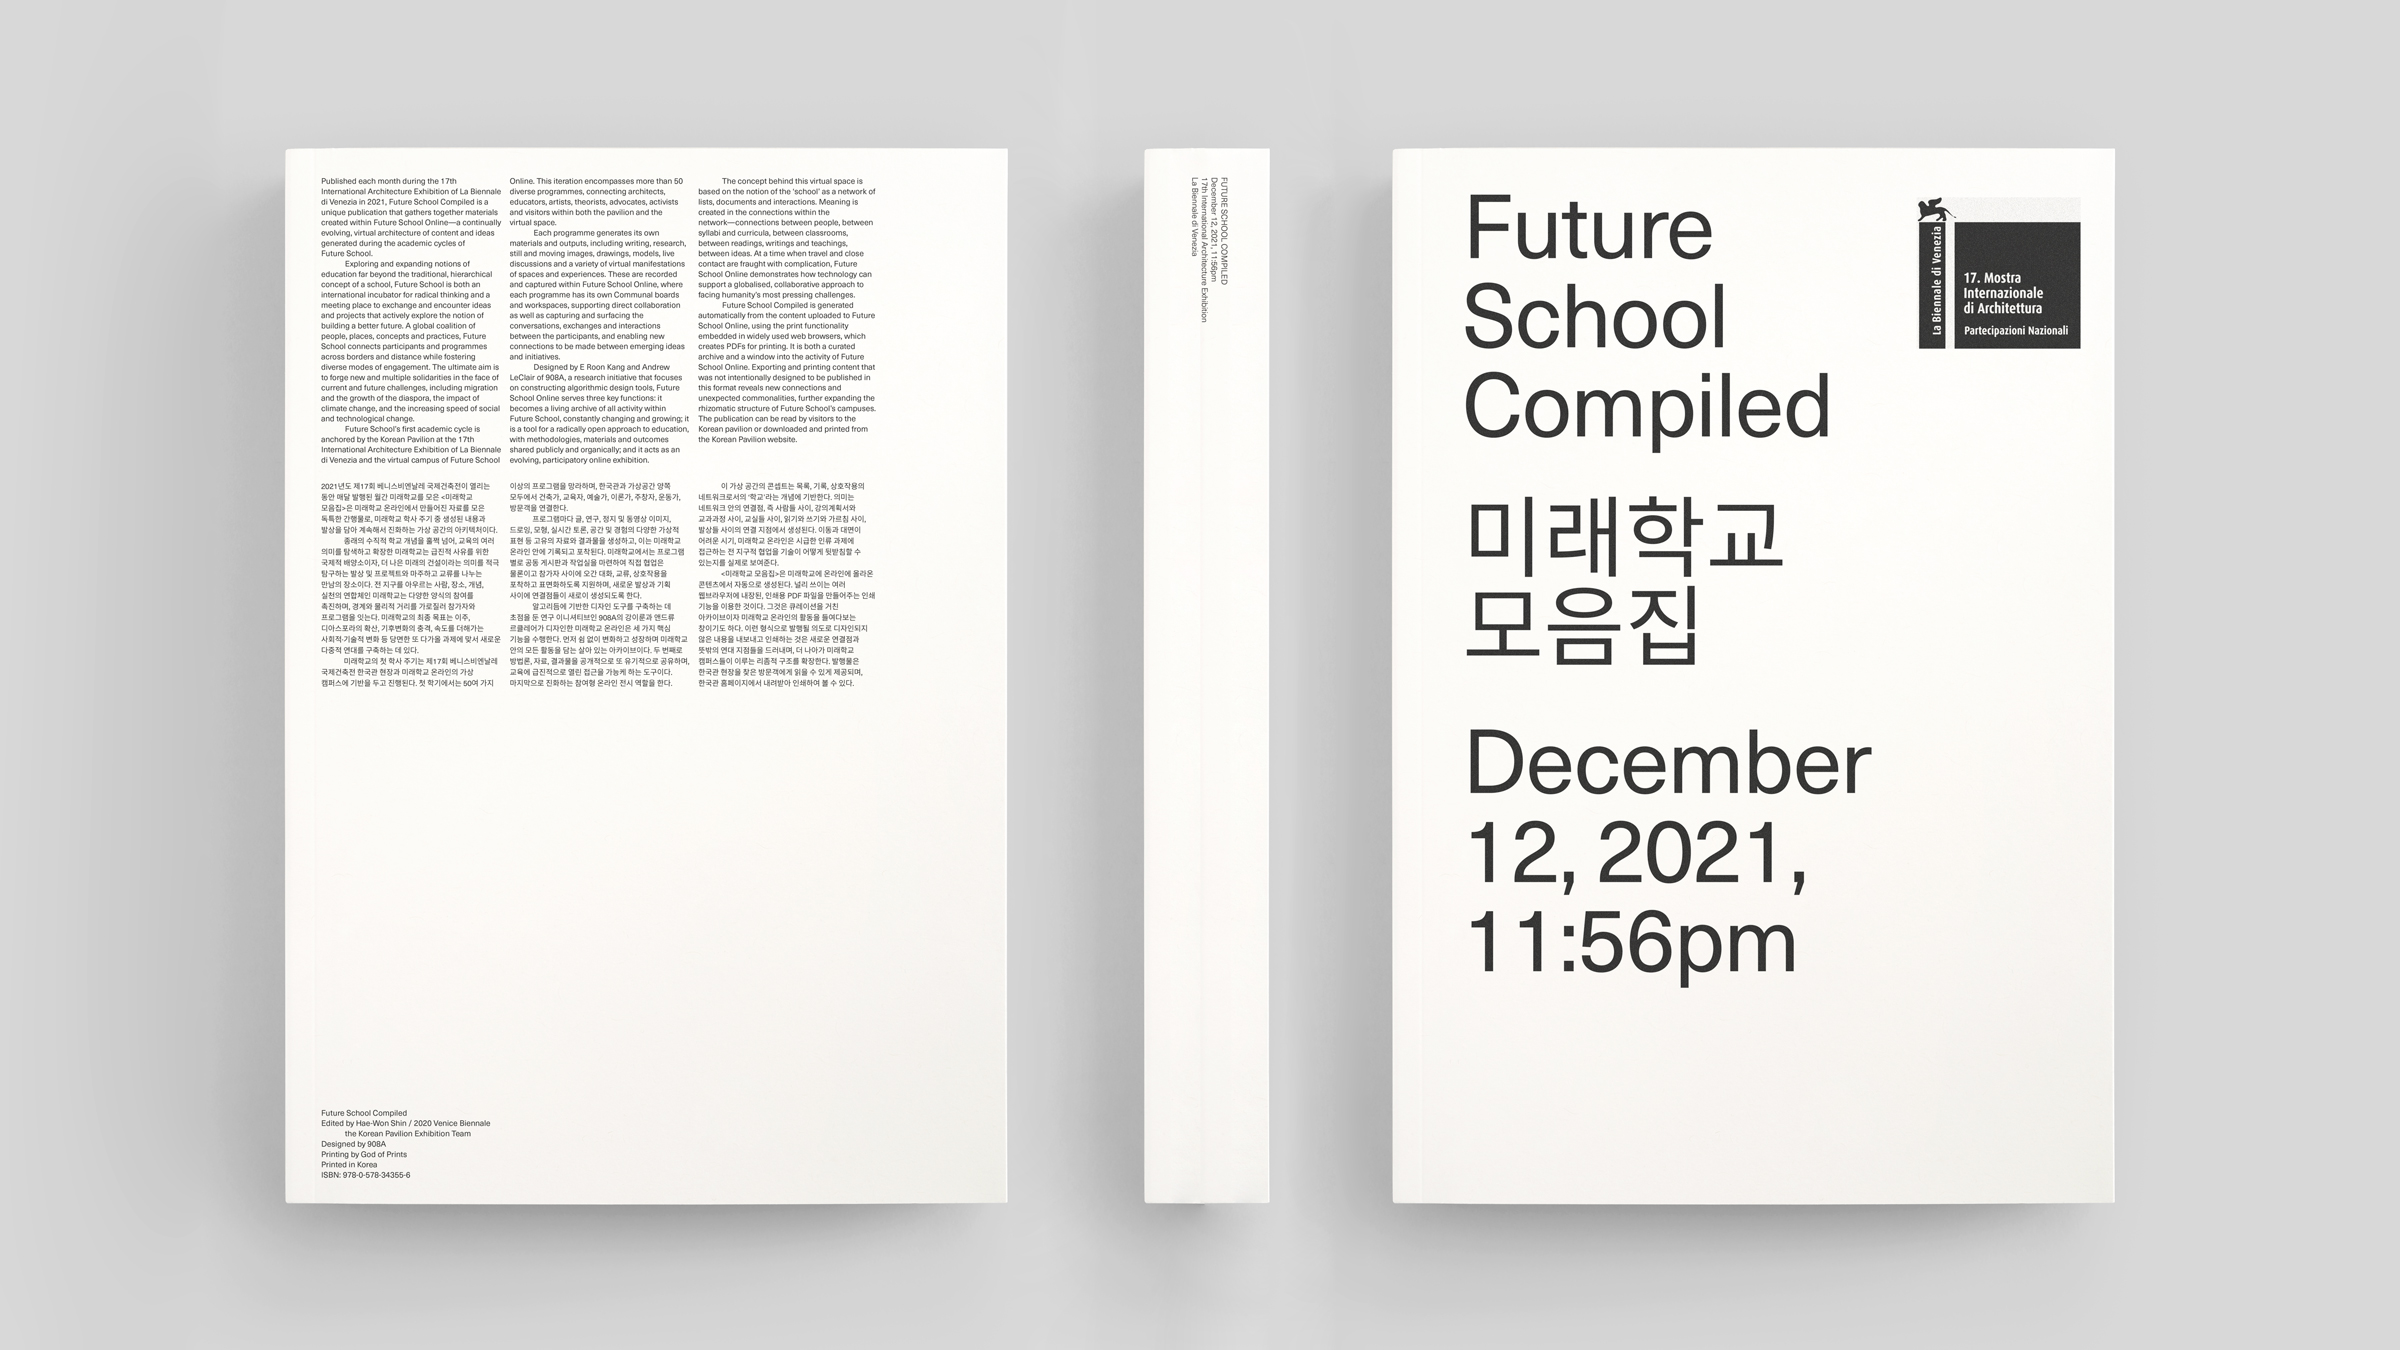 Future School Compiled: monthly issues from August to December, 2021 in a single volume